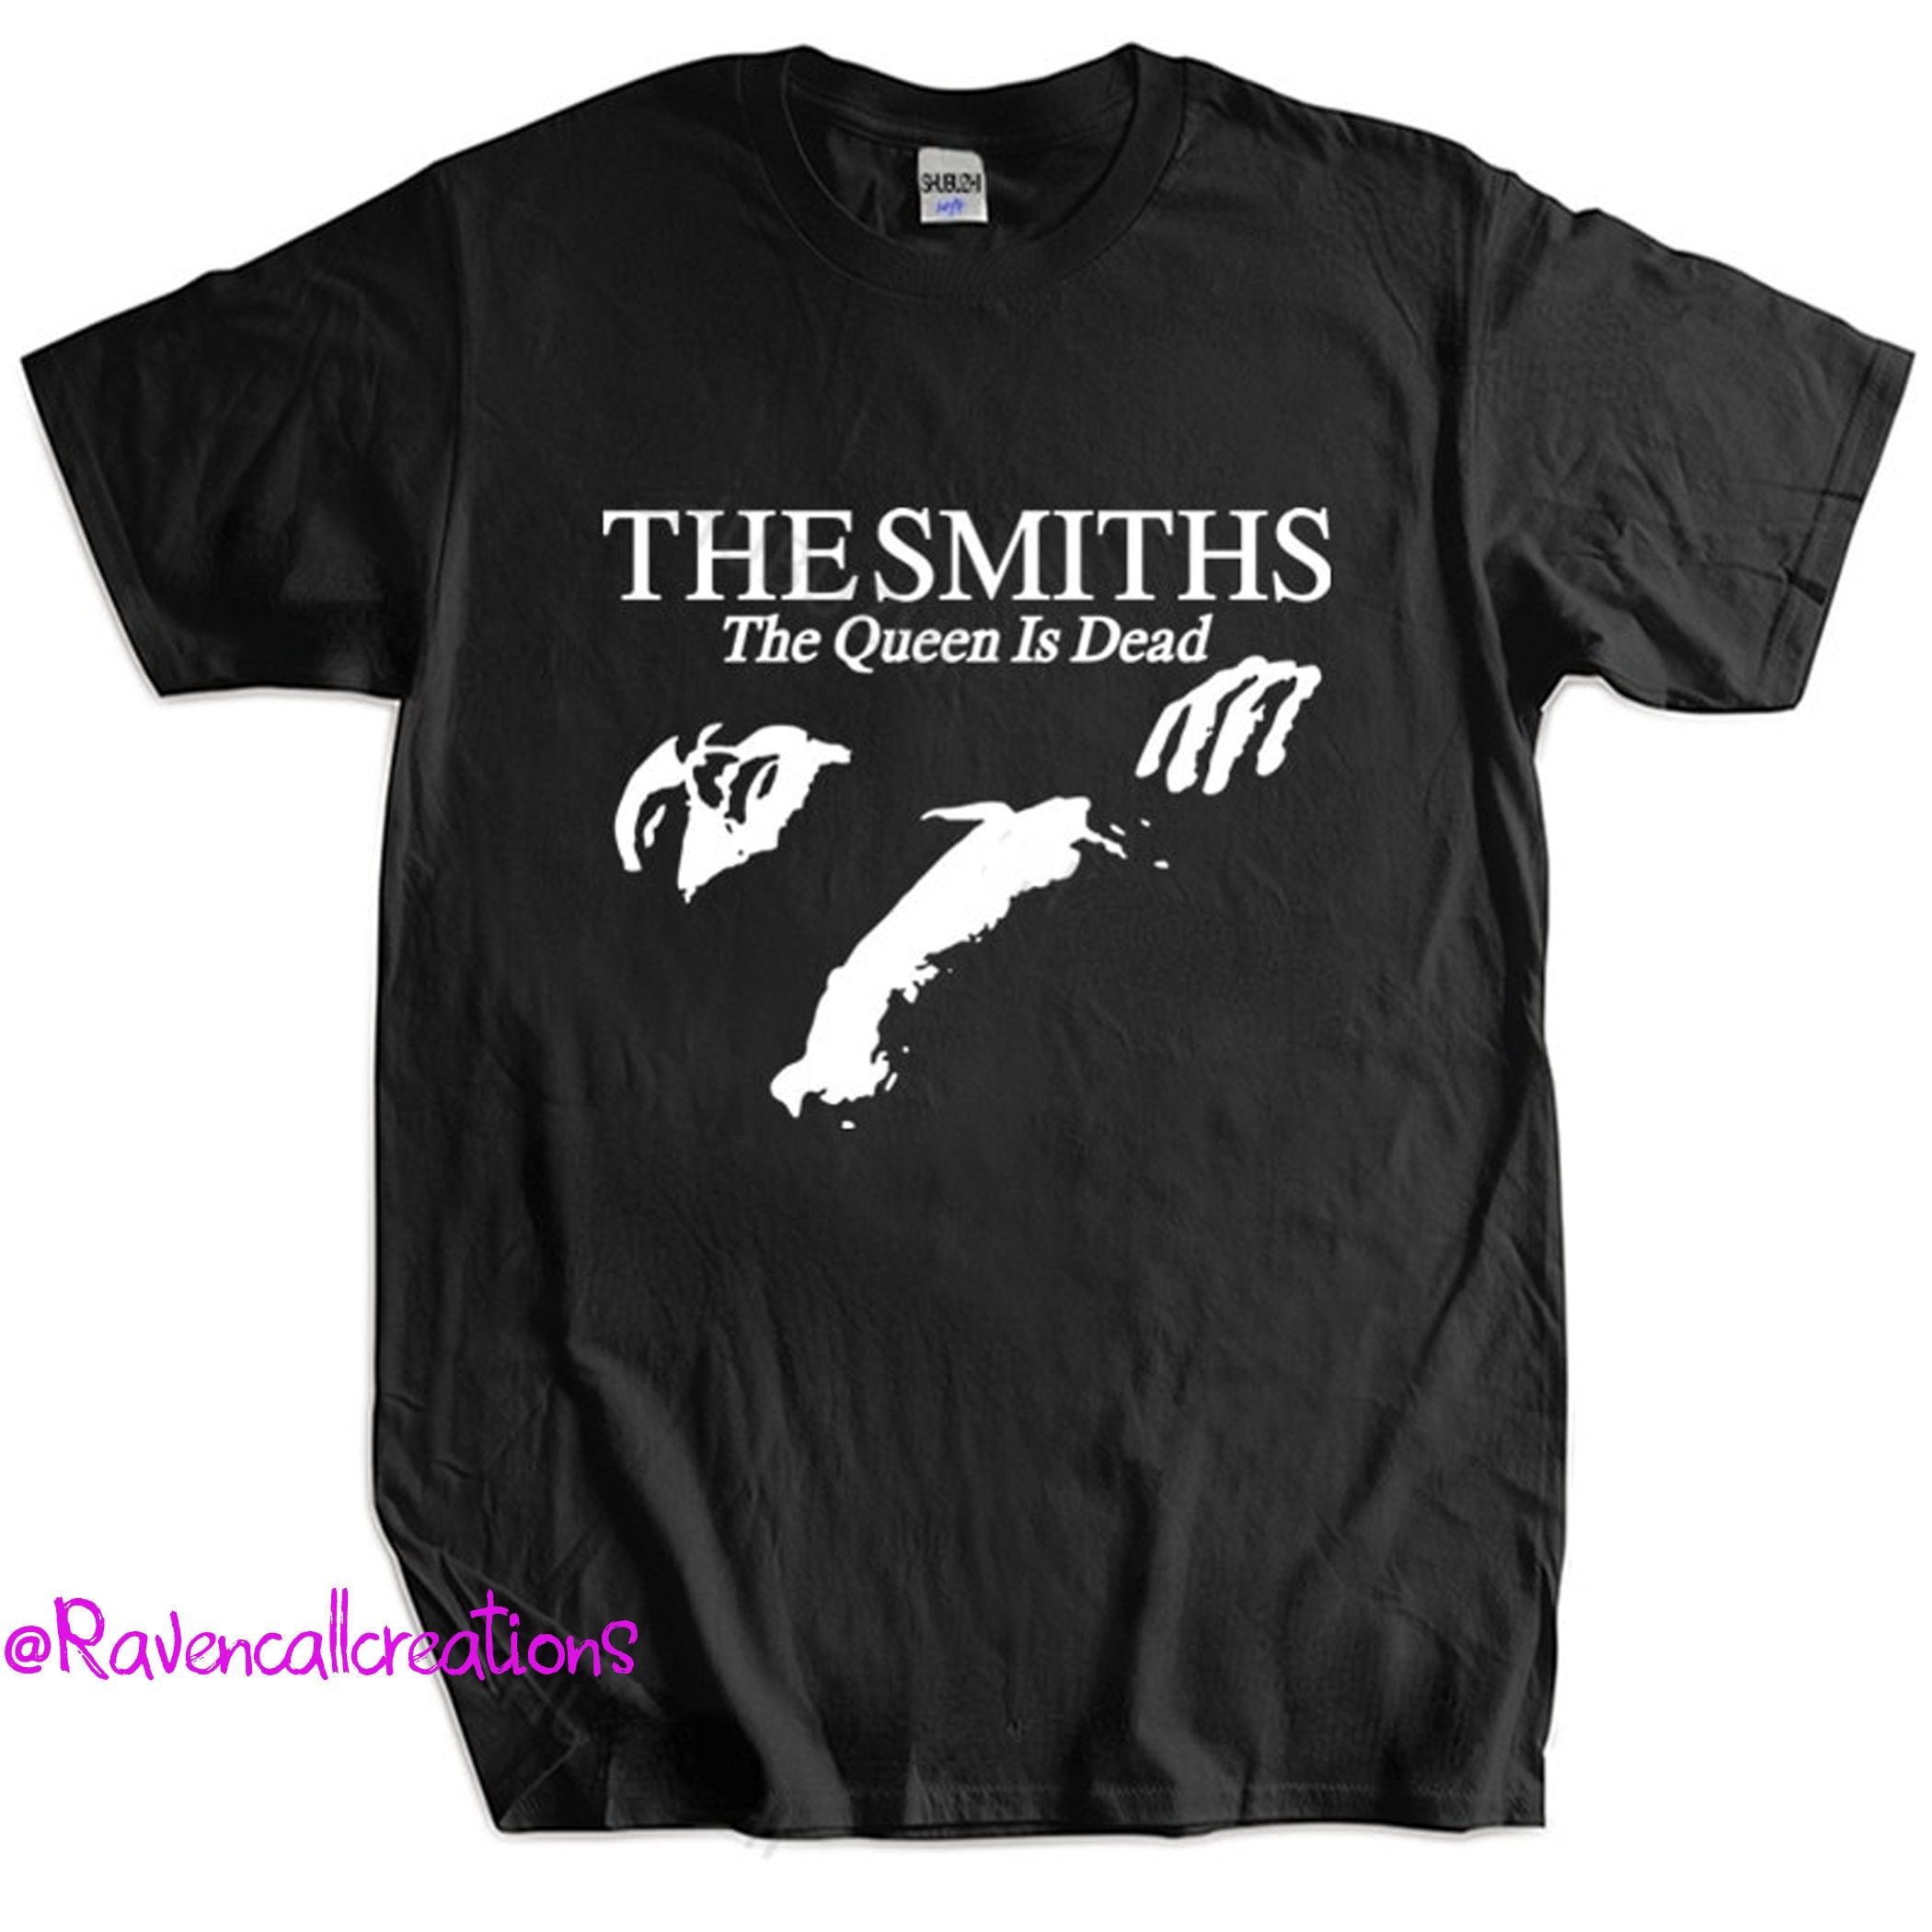 Discover The smiths shirt , Vintage 90s The Smiths The Queen Is Dead T-Shirt, The Smiths rock band tour concert unisex t shirt